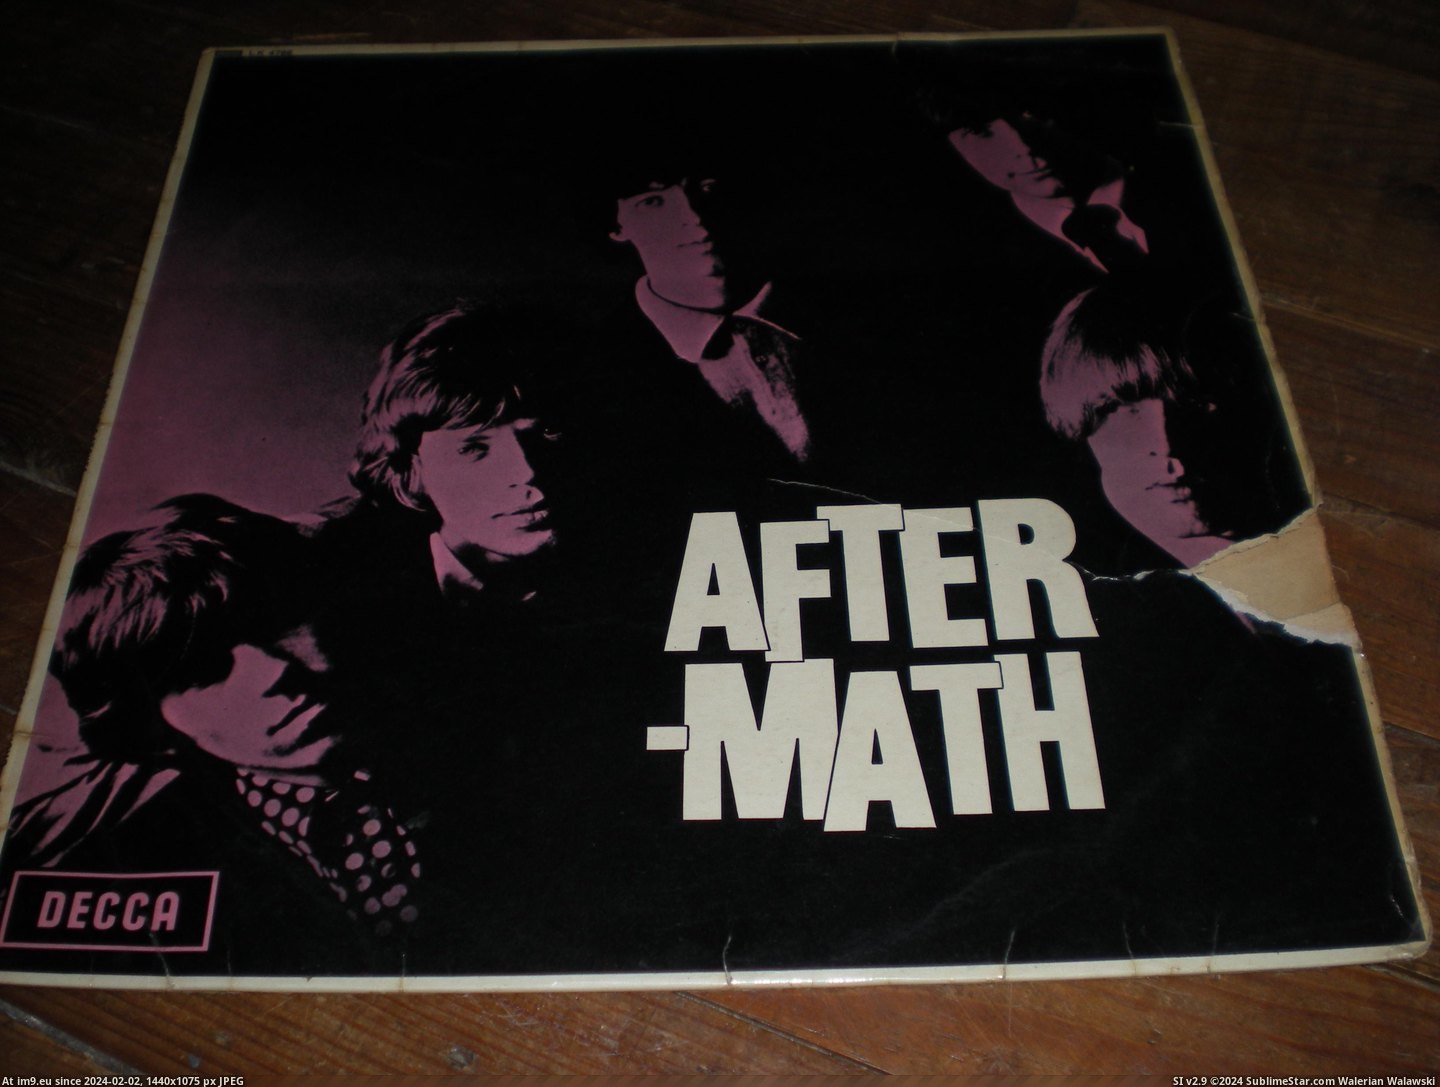  #Aftermath  Aftermath 6 Pic. (Image of album new 1))